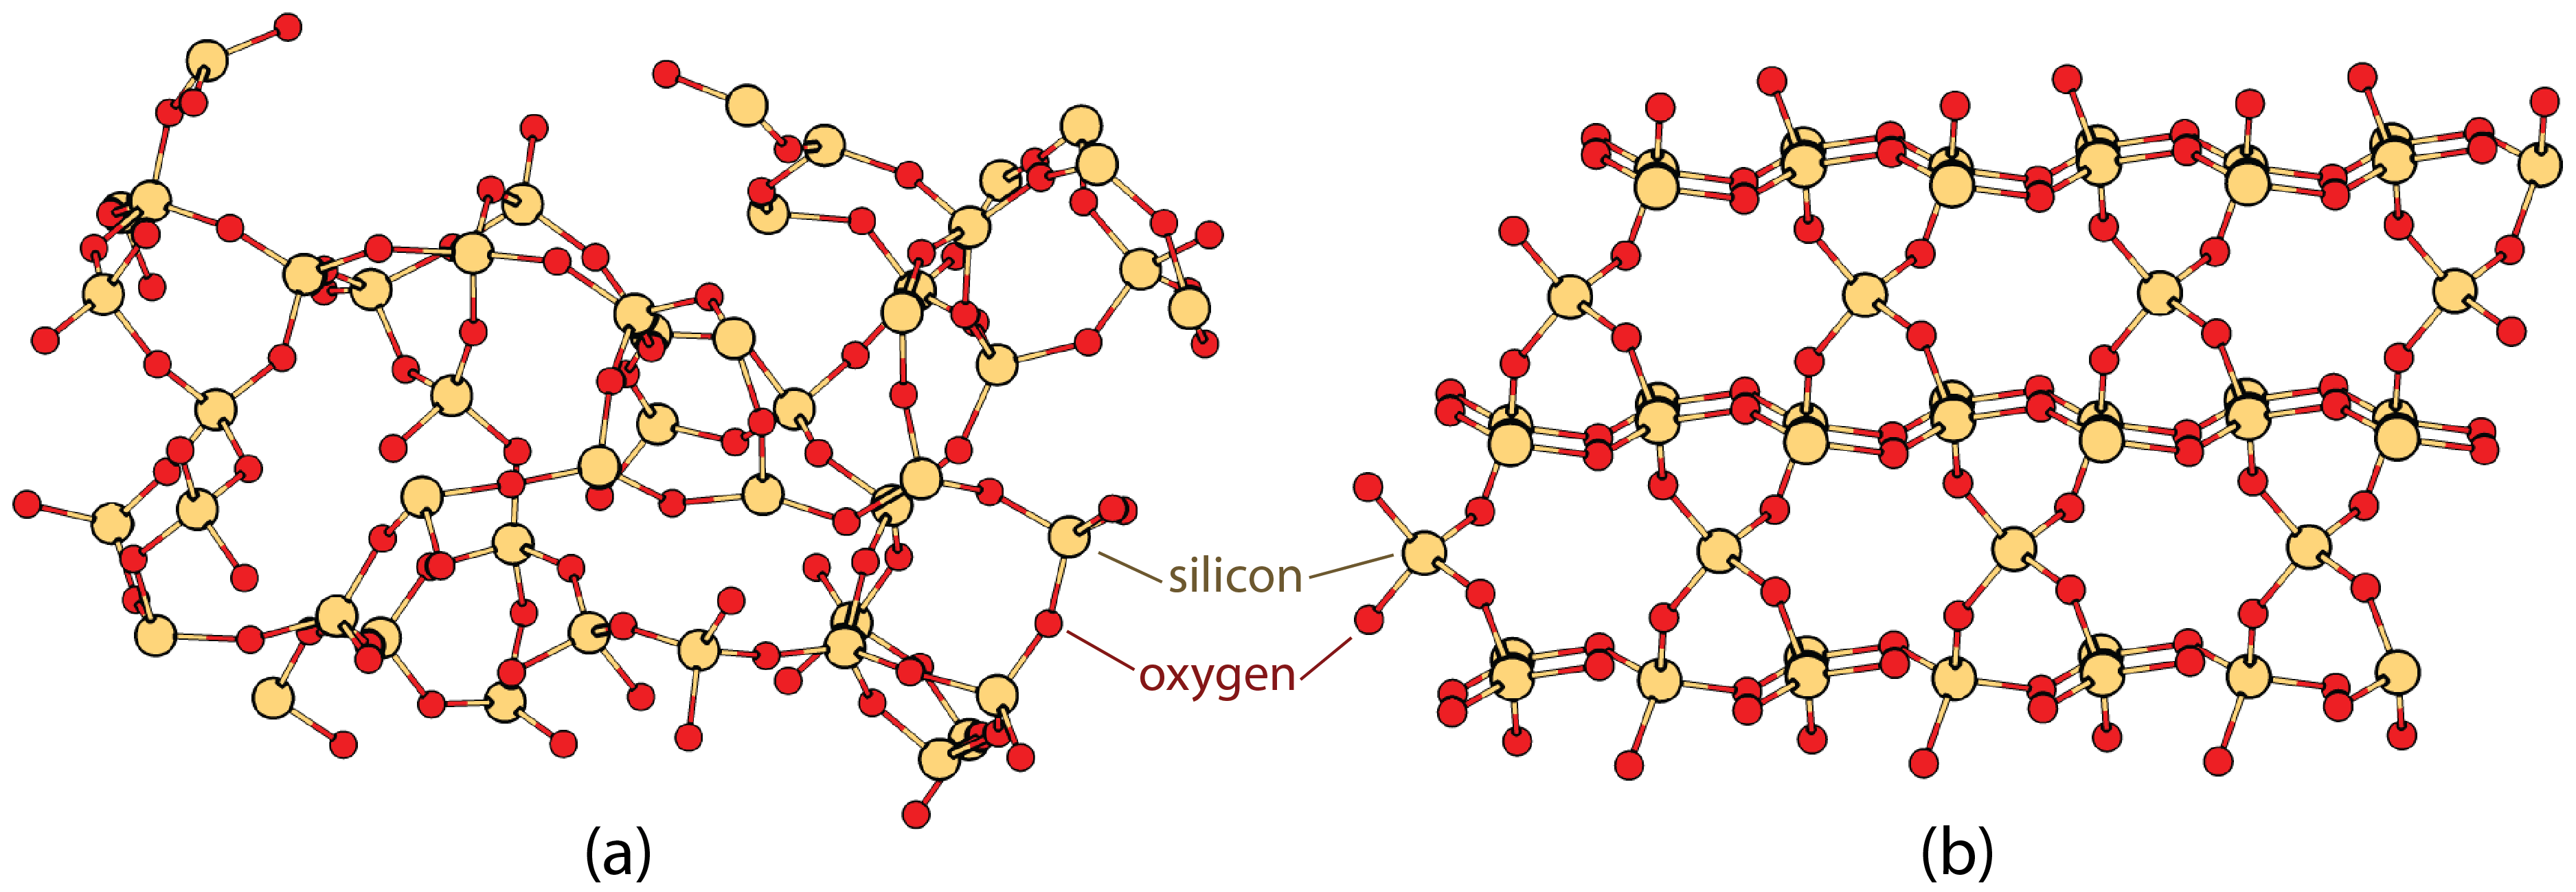 Two sets of structures are shown. The first set contains numerous silicon and oxygen atoms bonded together without apparent order. The second set shows silicon and oxygen atoms bonded together in an orderly arrangement.